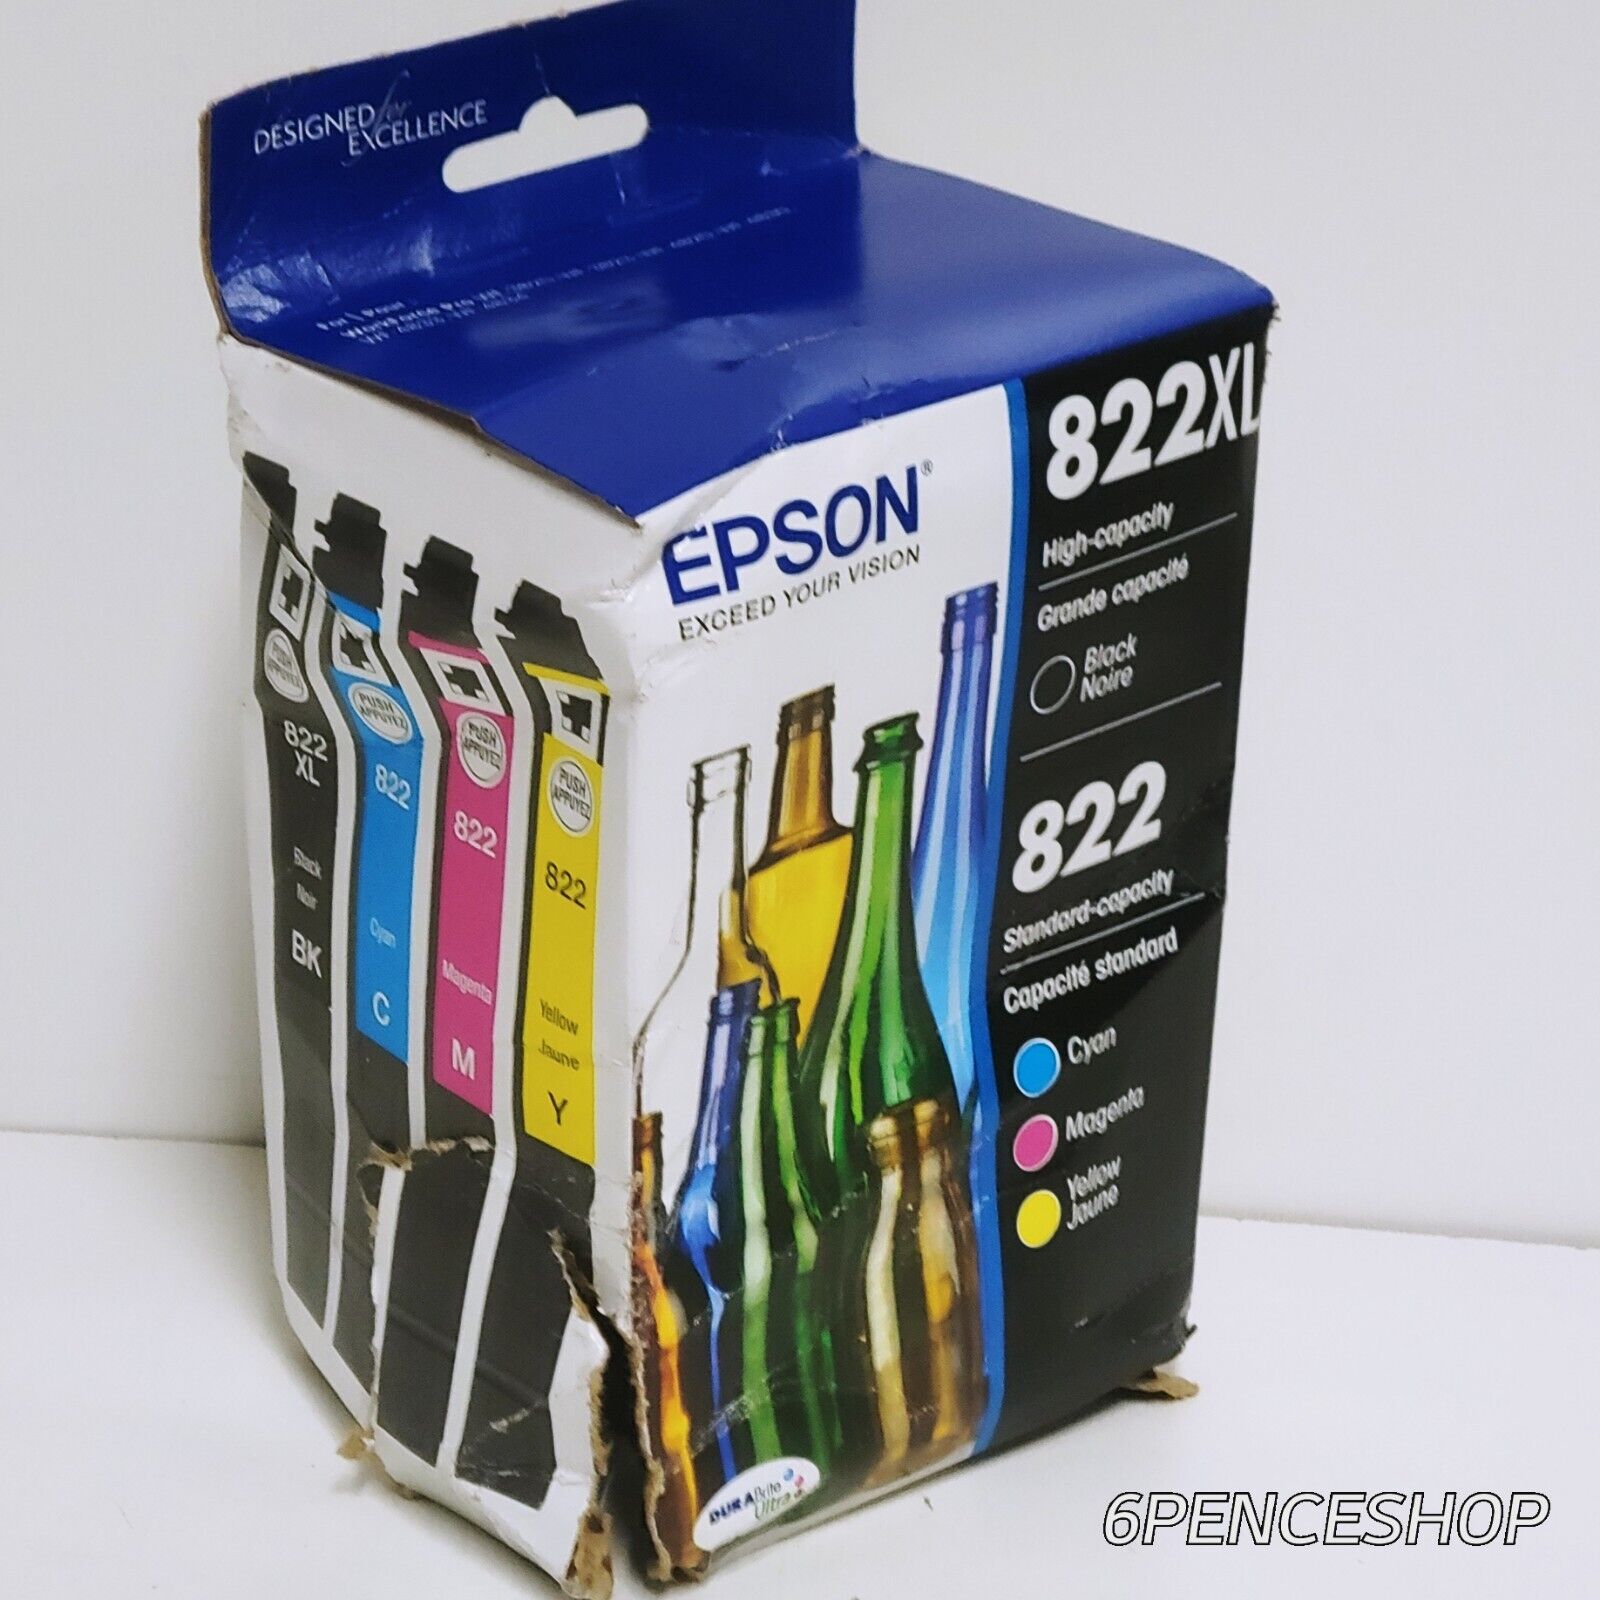 IMPERFECT BOX NEW 4-PACK EPSON GENUINE 822XL BLACK & 822 COLOR INK WF-4834